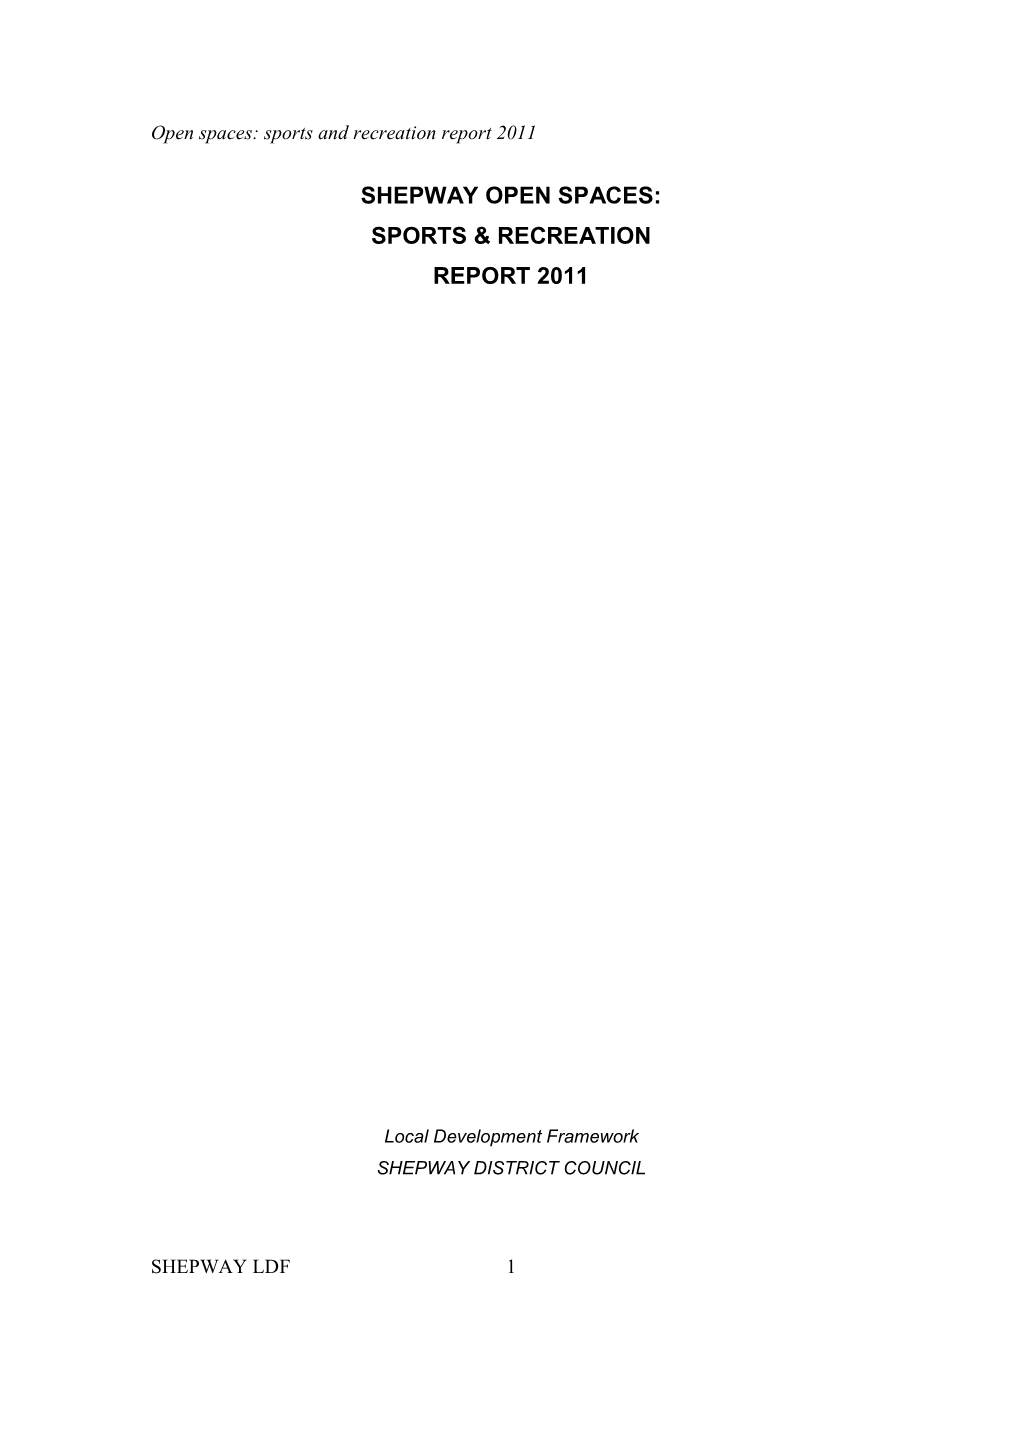 Shepway Open Spaces: Sports & Recreation Report 2011